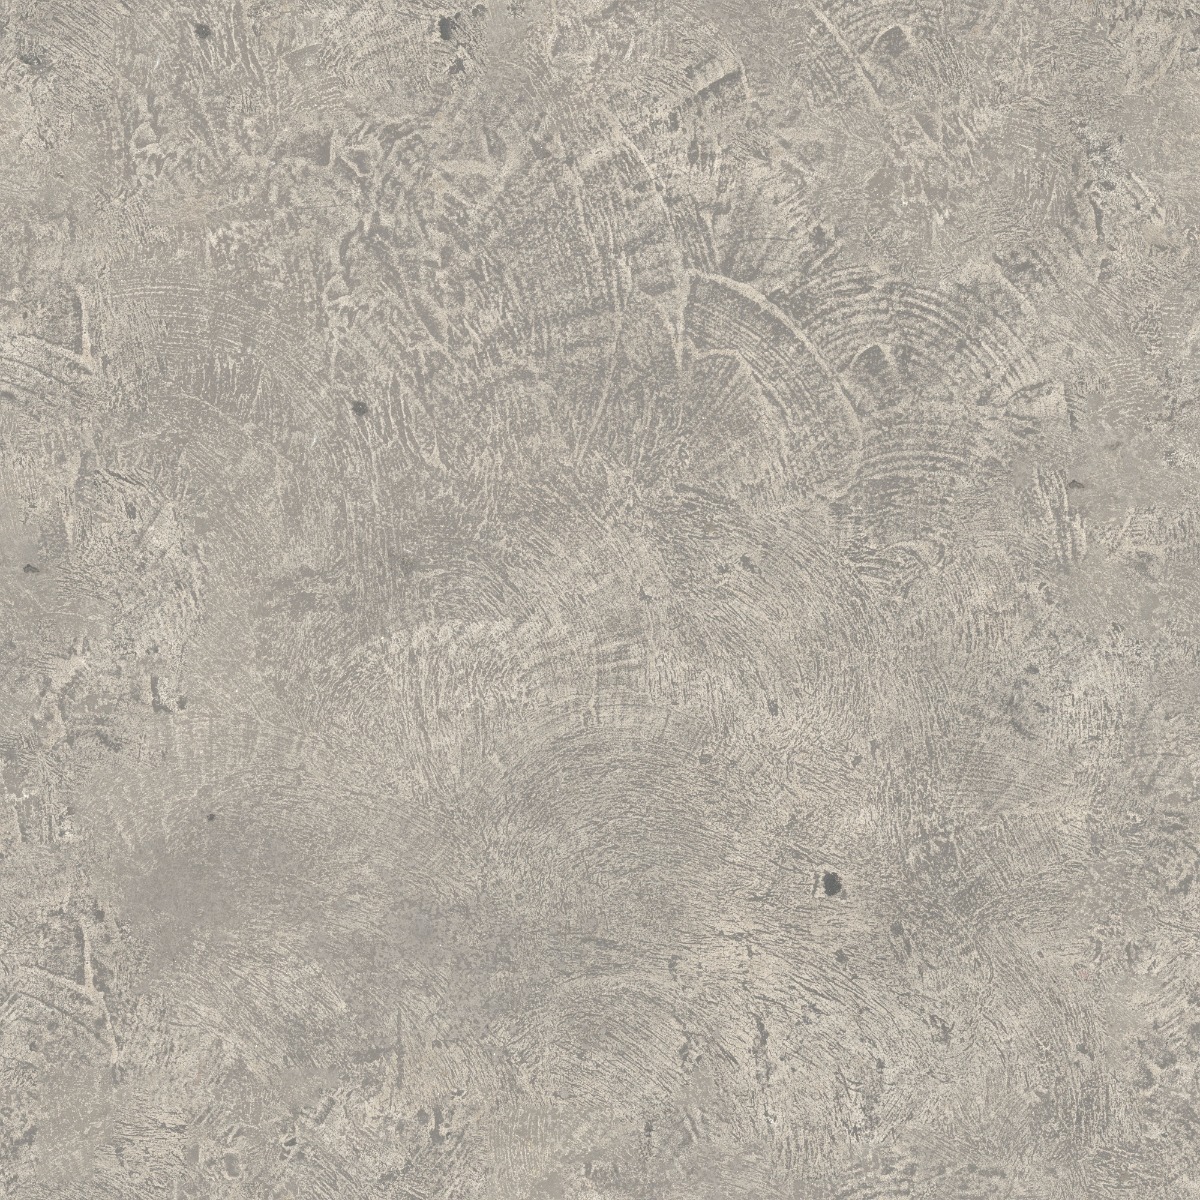 A seamless concrete texture with brushed concrete blocks arranged in a None pattern